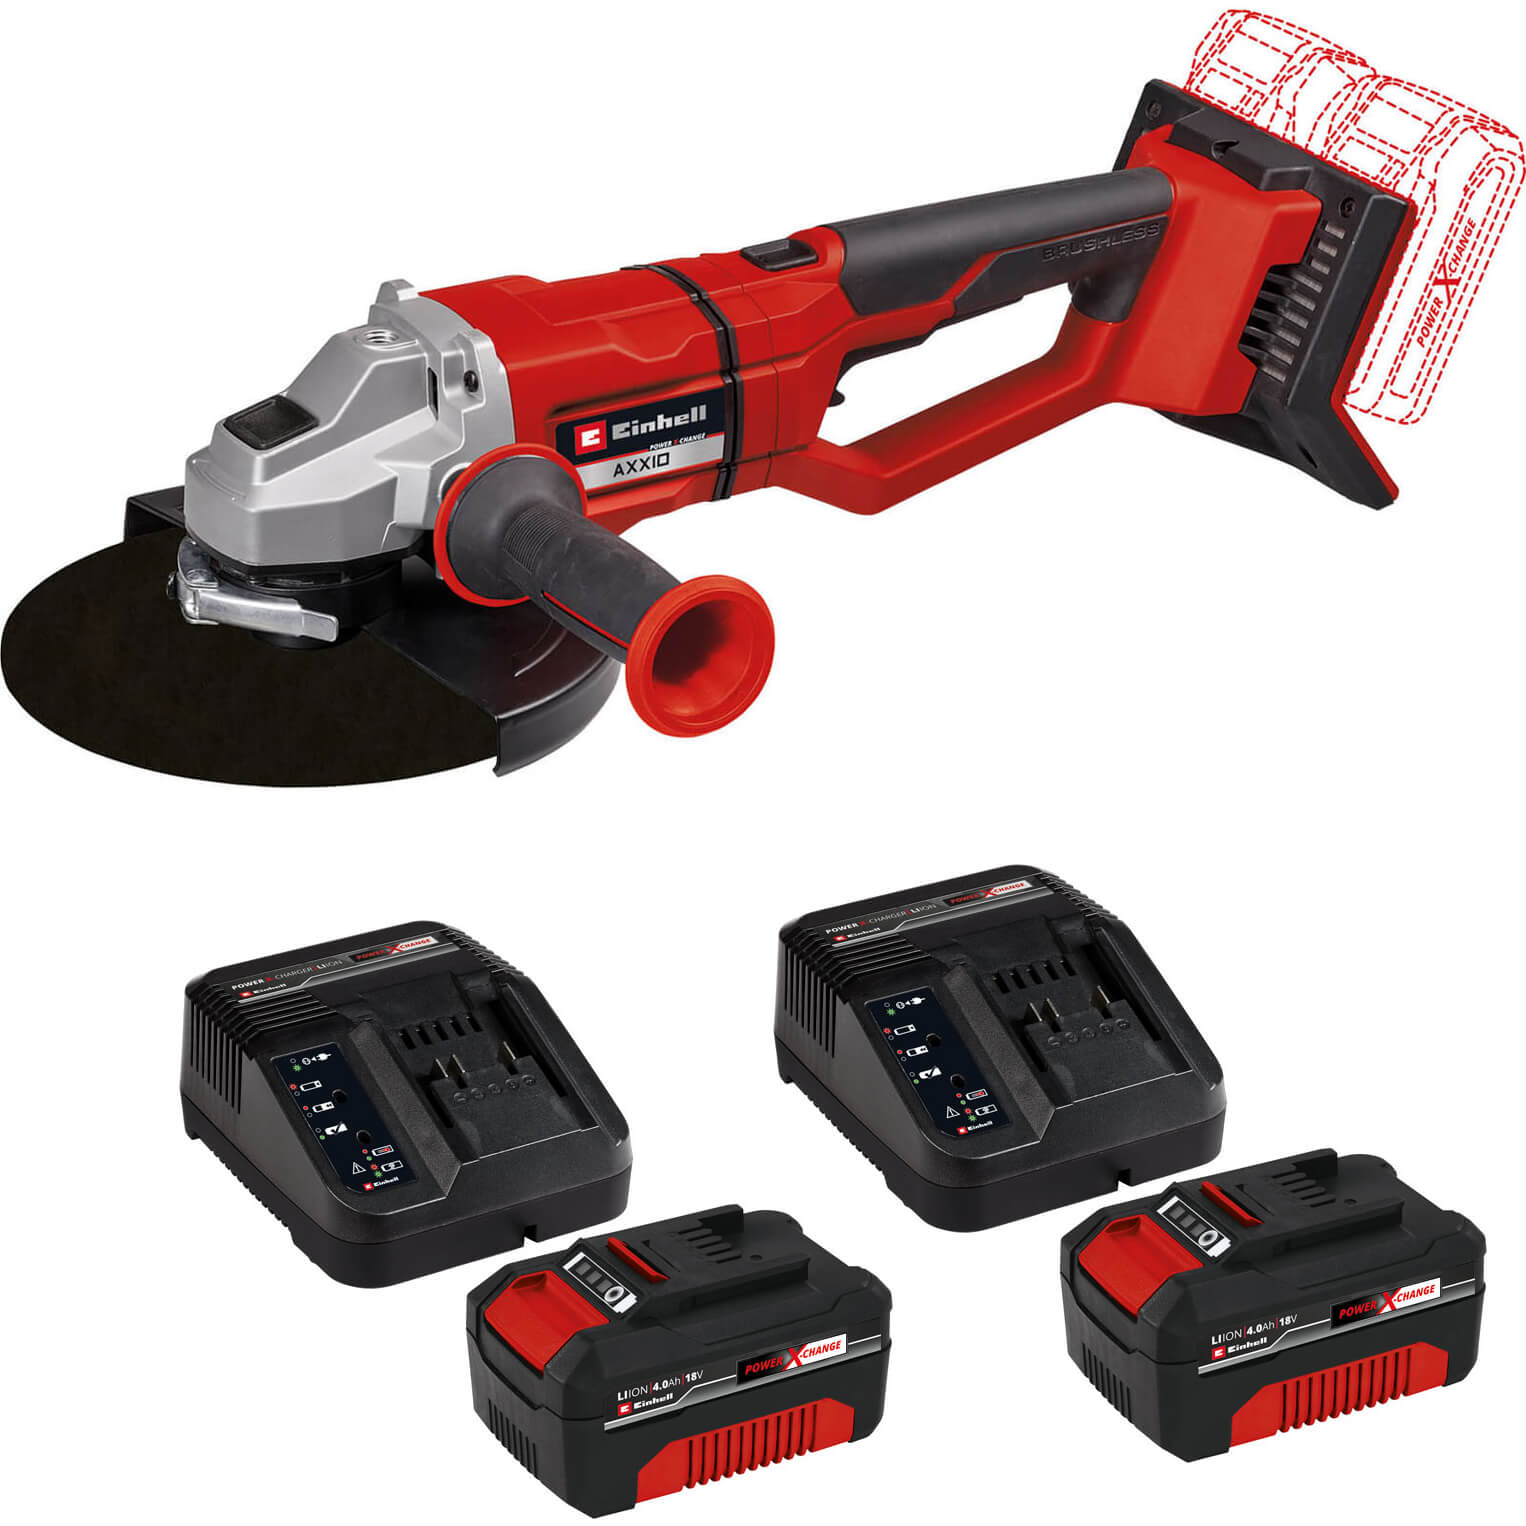 Image of Einhell AXXIO 36/230 Q 36v Cordless Brushless Angle Grinder 230mm 2 x 4ah Li-ion Charger No Case